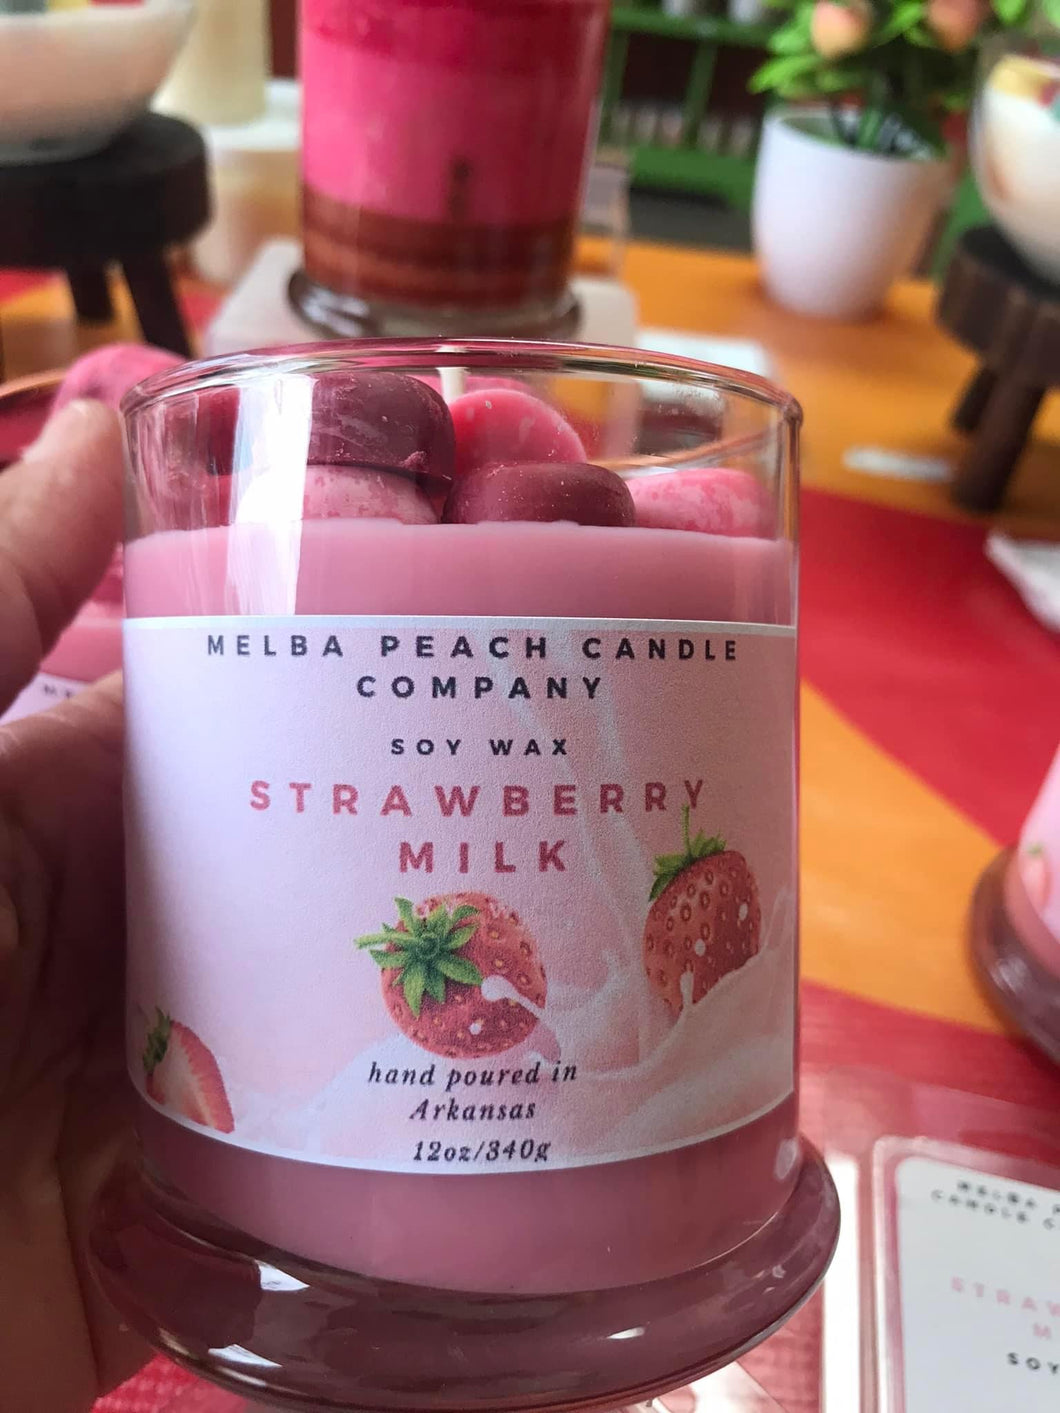 Strawberry Milk Soywax Candle